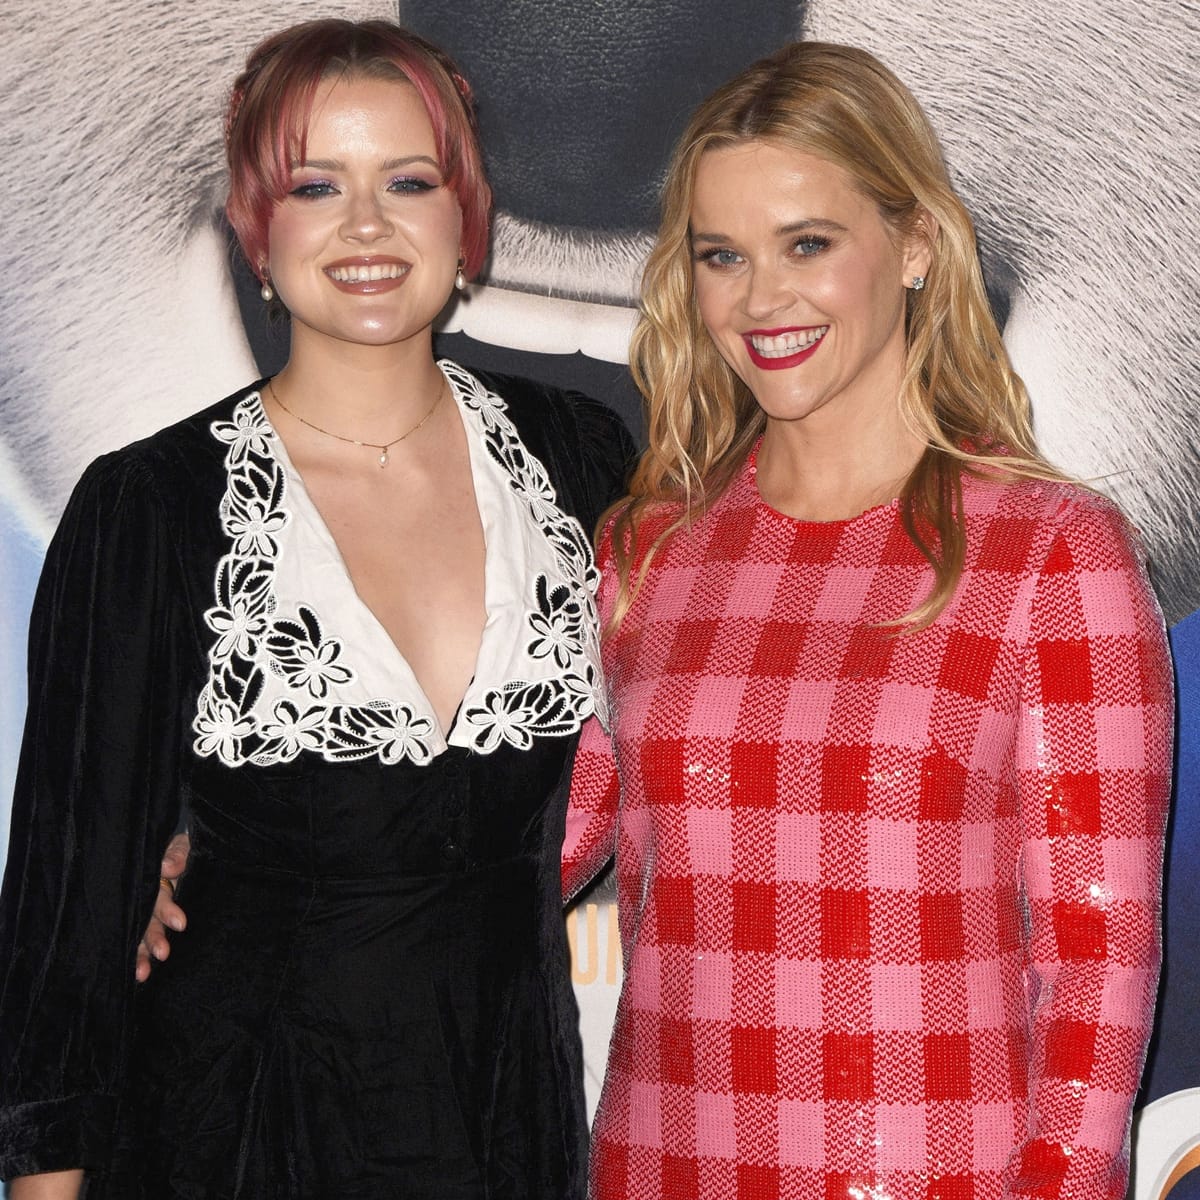 Ava Elizabeth Phillippe and her mother Reese Witherspoon attend the premiere of Illuminations "Sing 2"